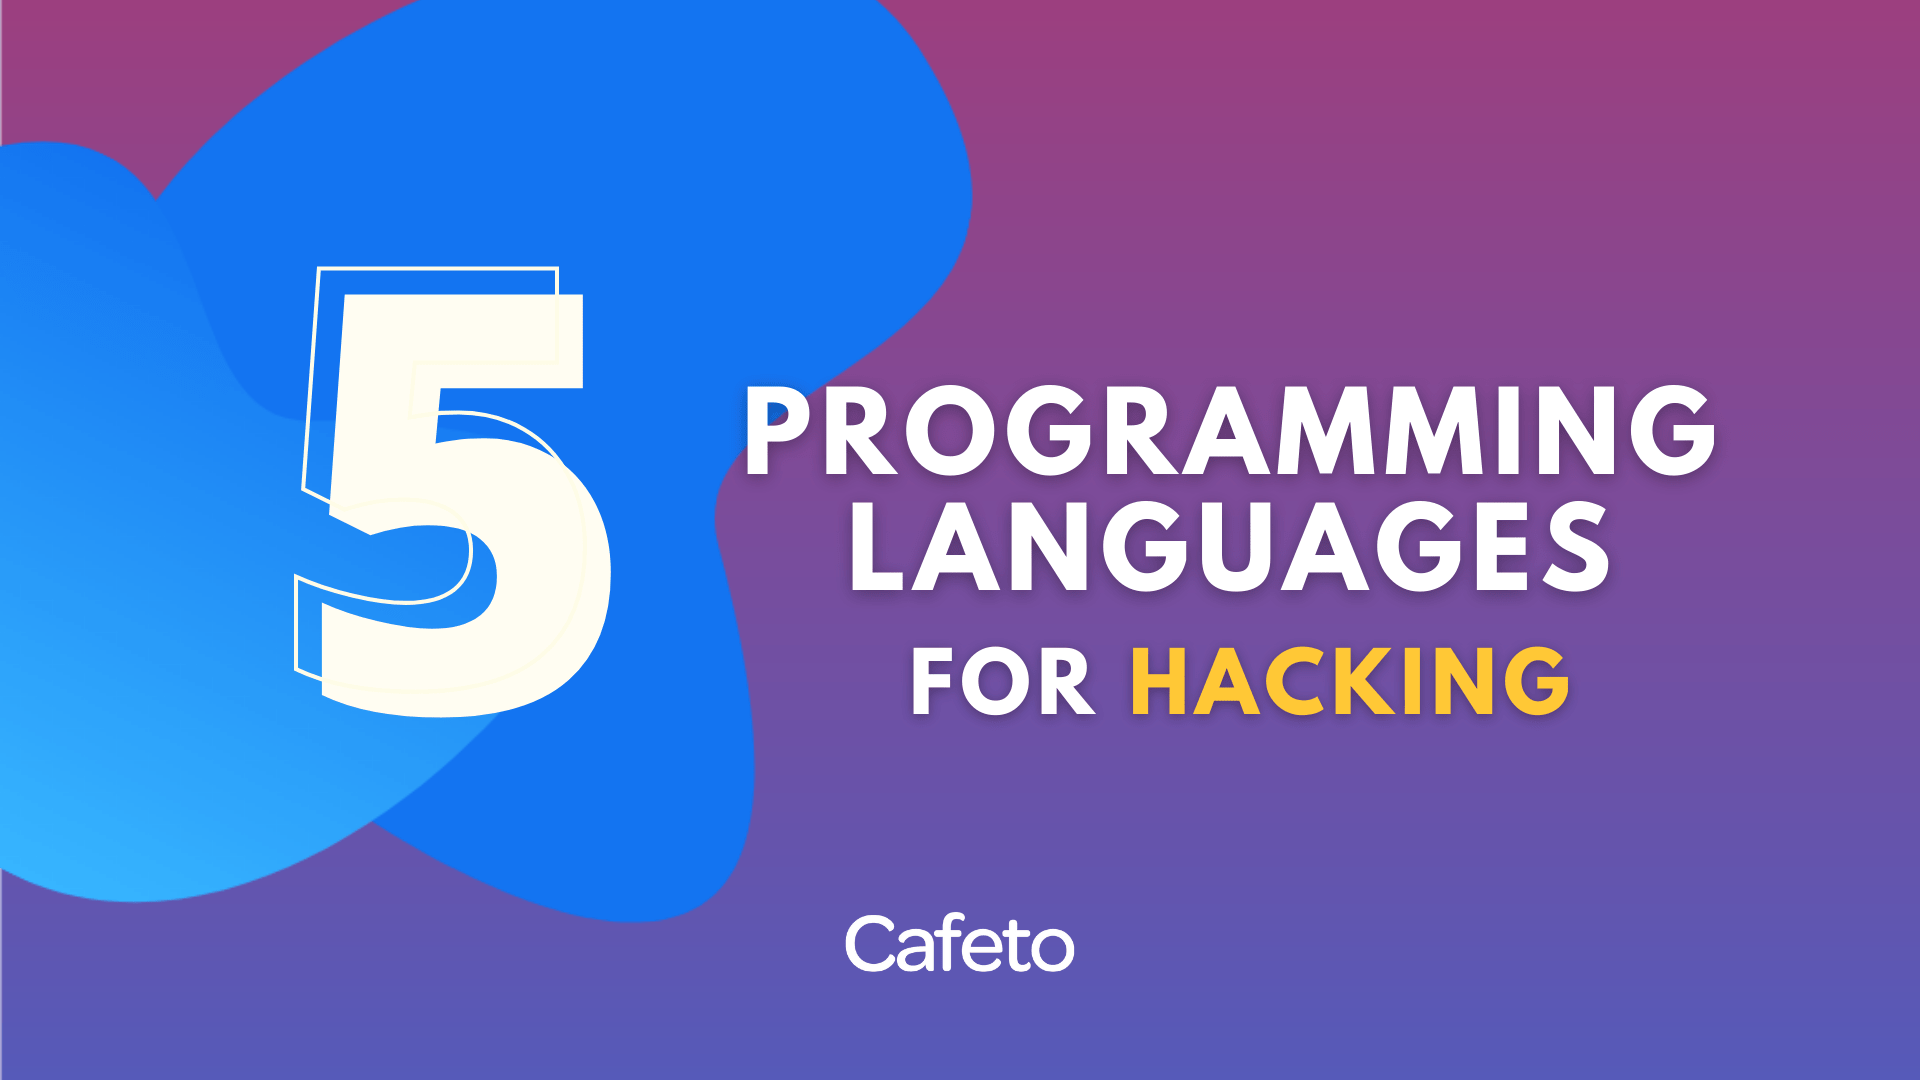 Hacking With These 5 Programming Languages